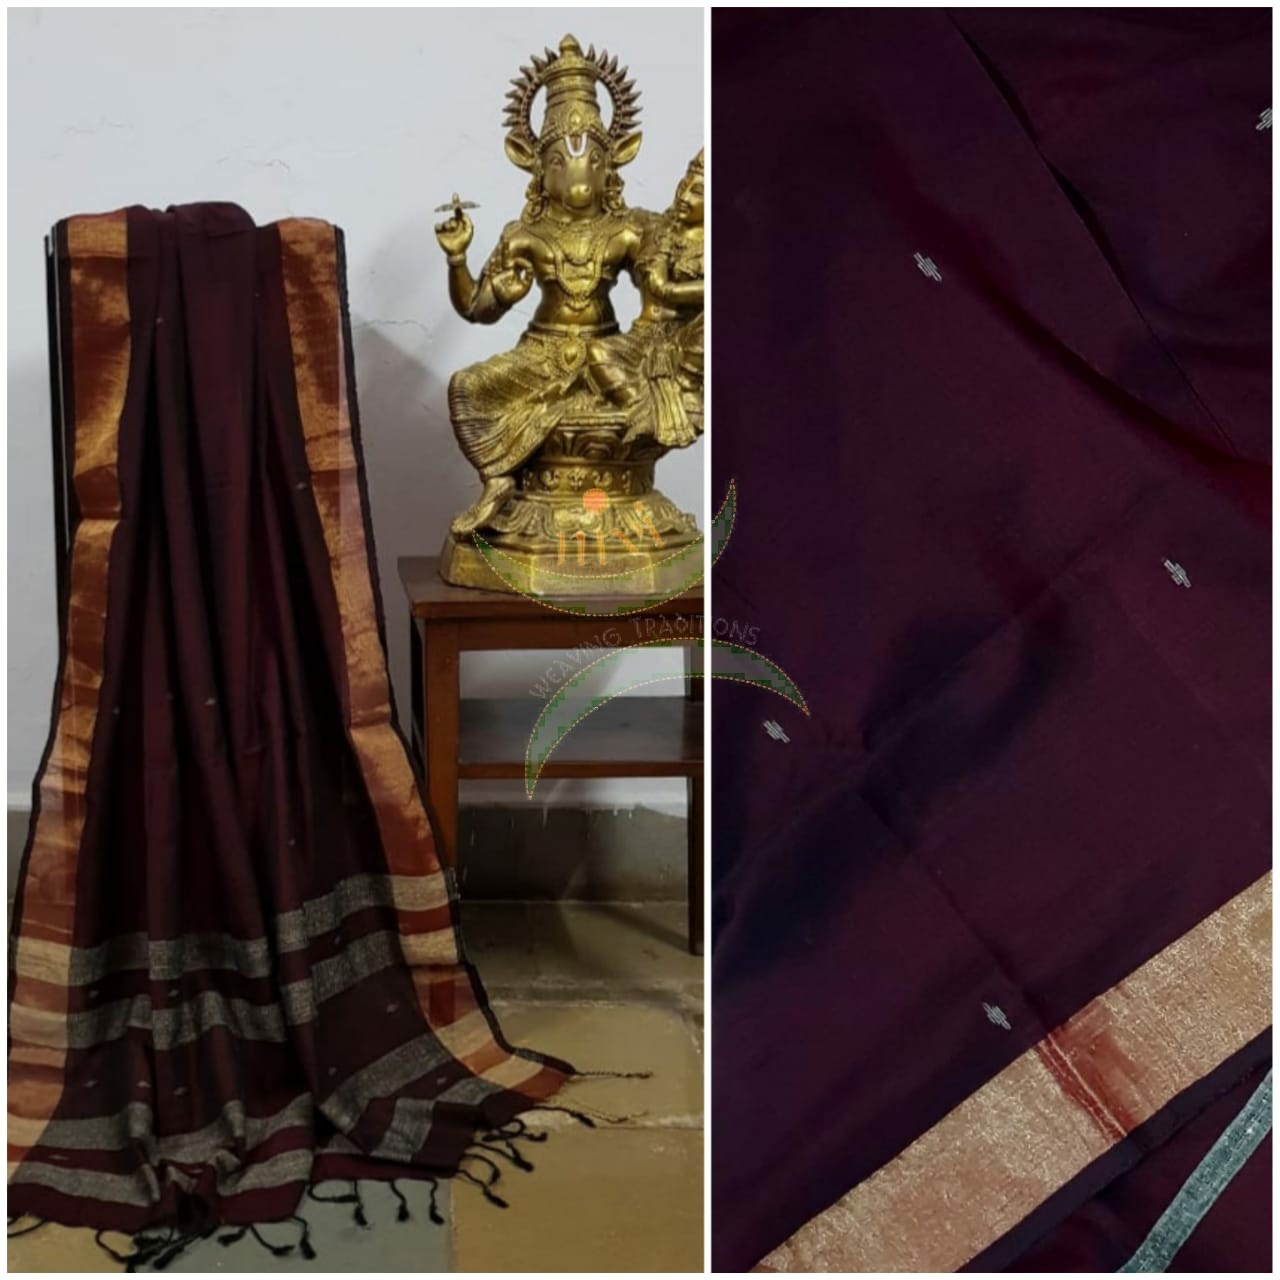 Maroon handloom dupatta subtle gold borders and buttis on the body. And striped geecha borders